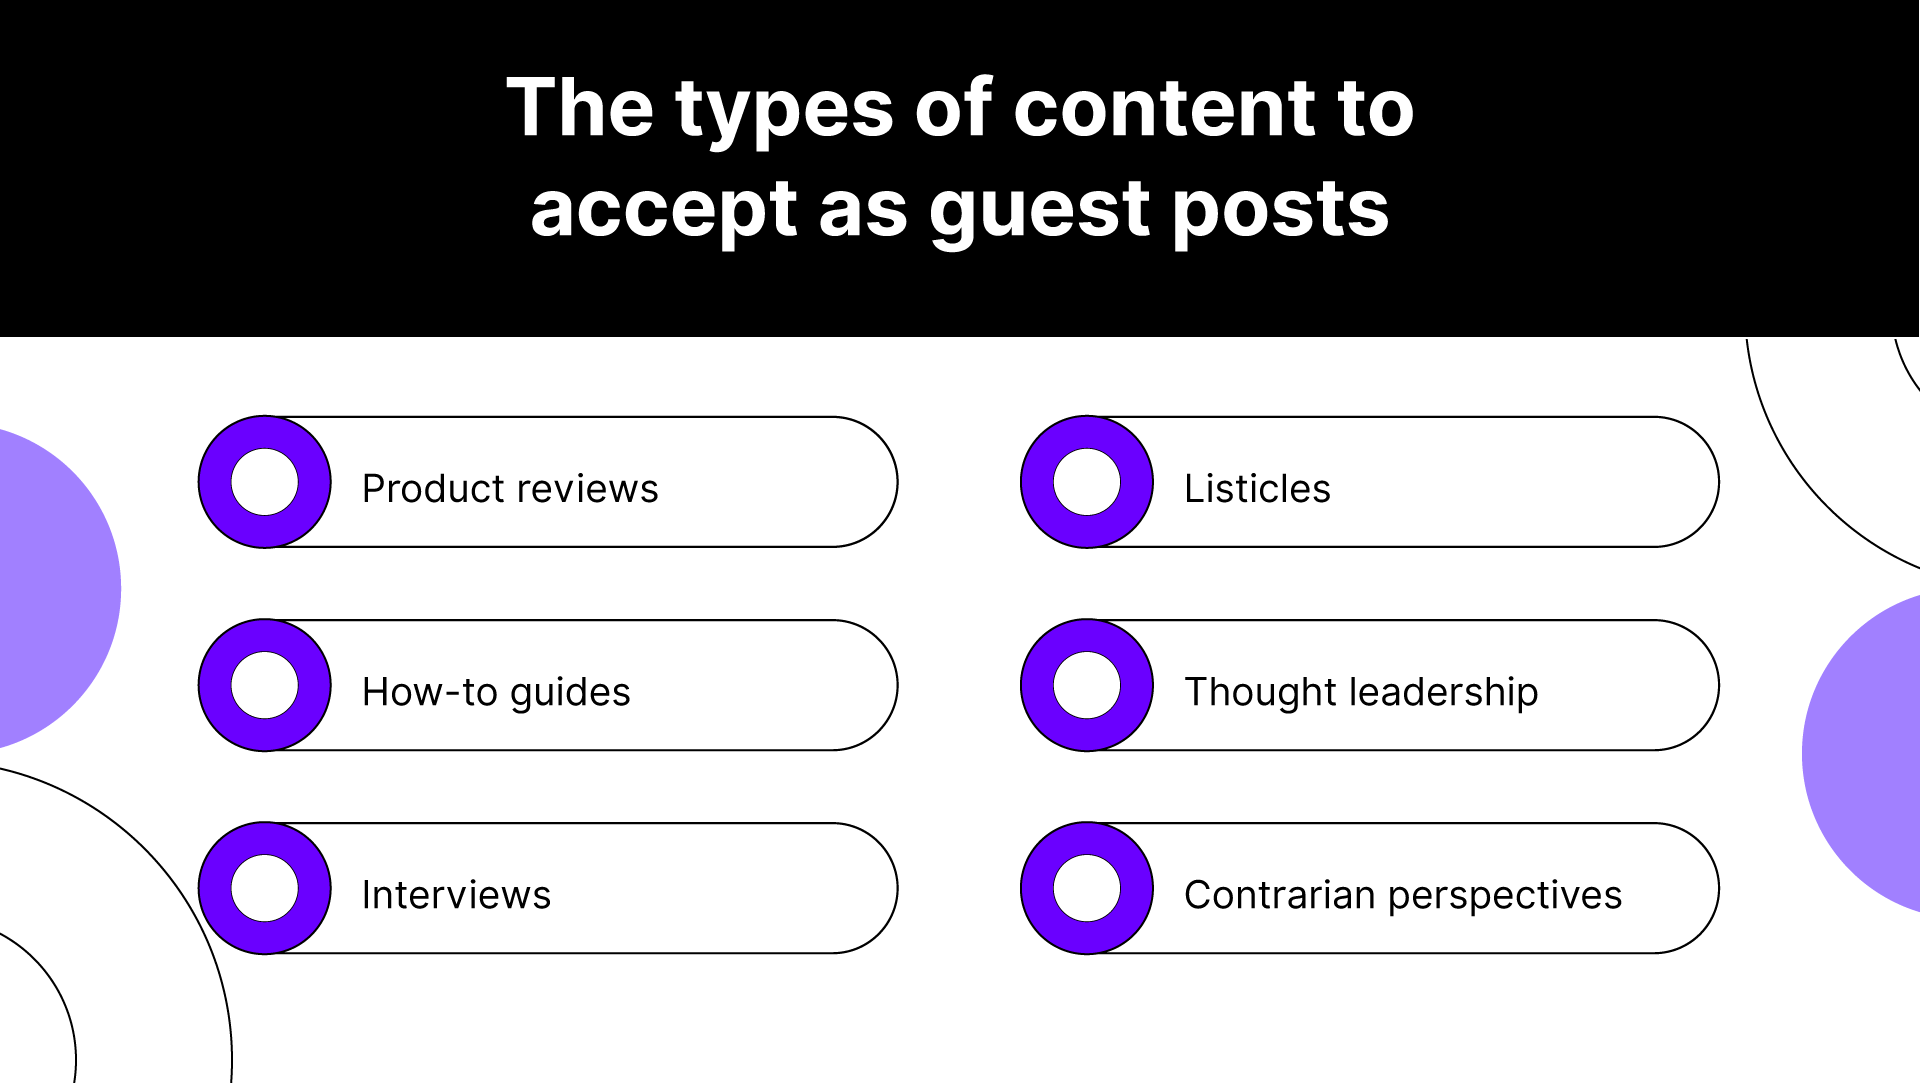 The types of content to accept as guest posts.